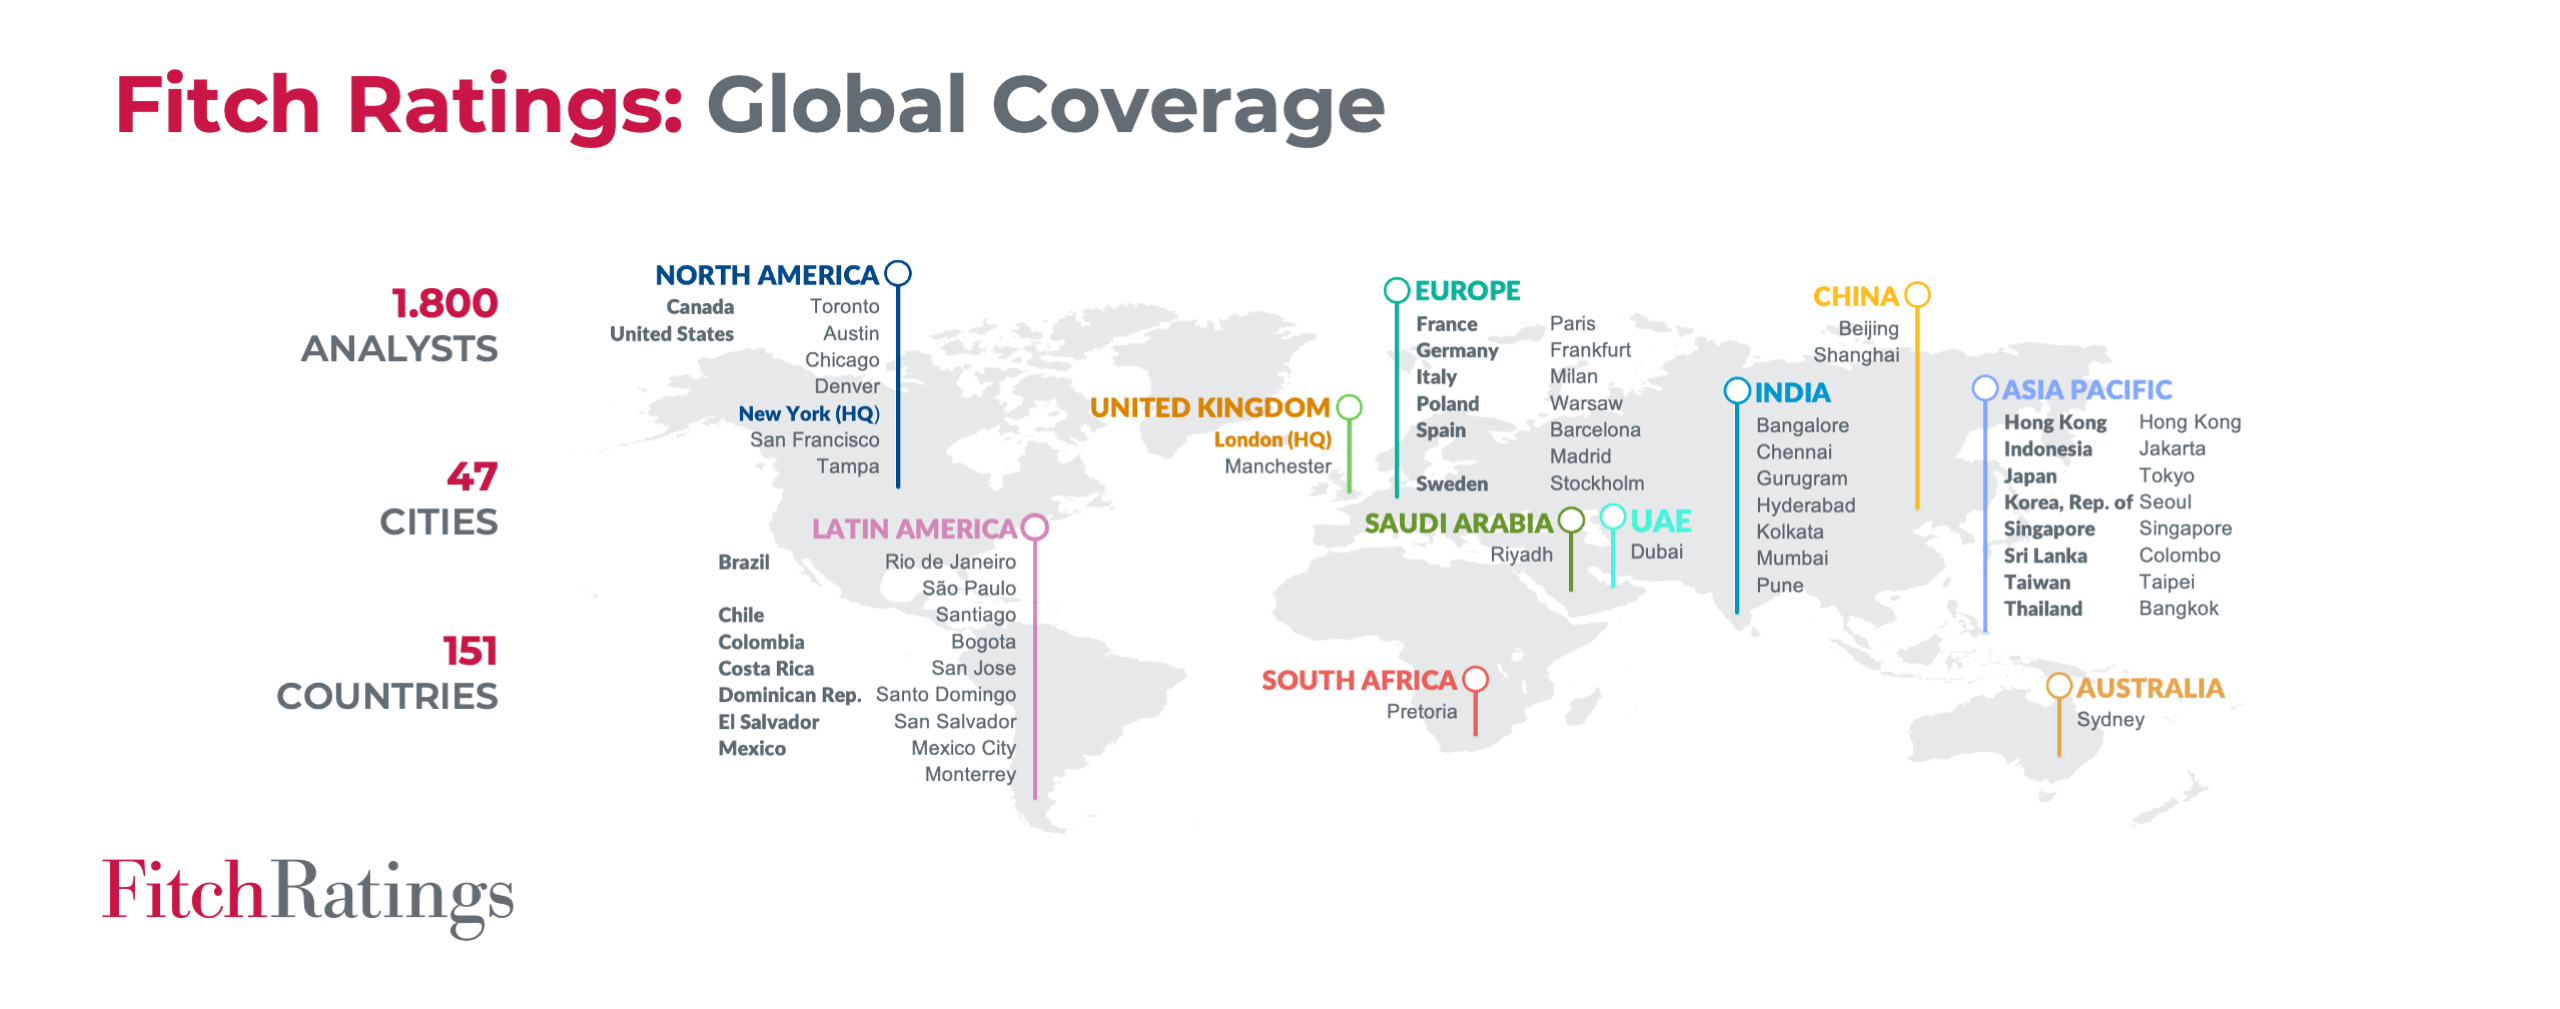 Fitch Rating: Global coverage